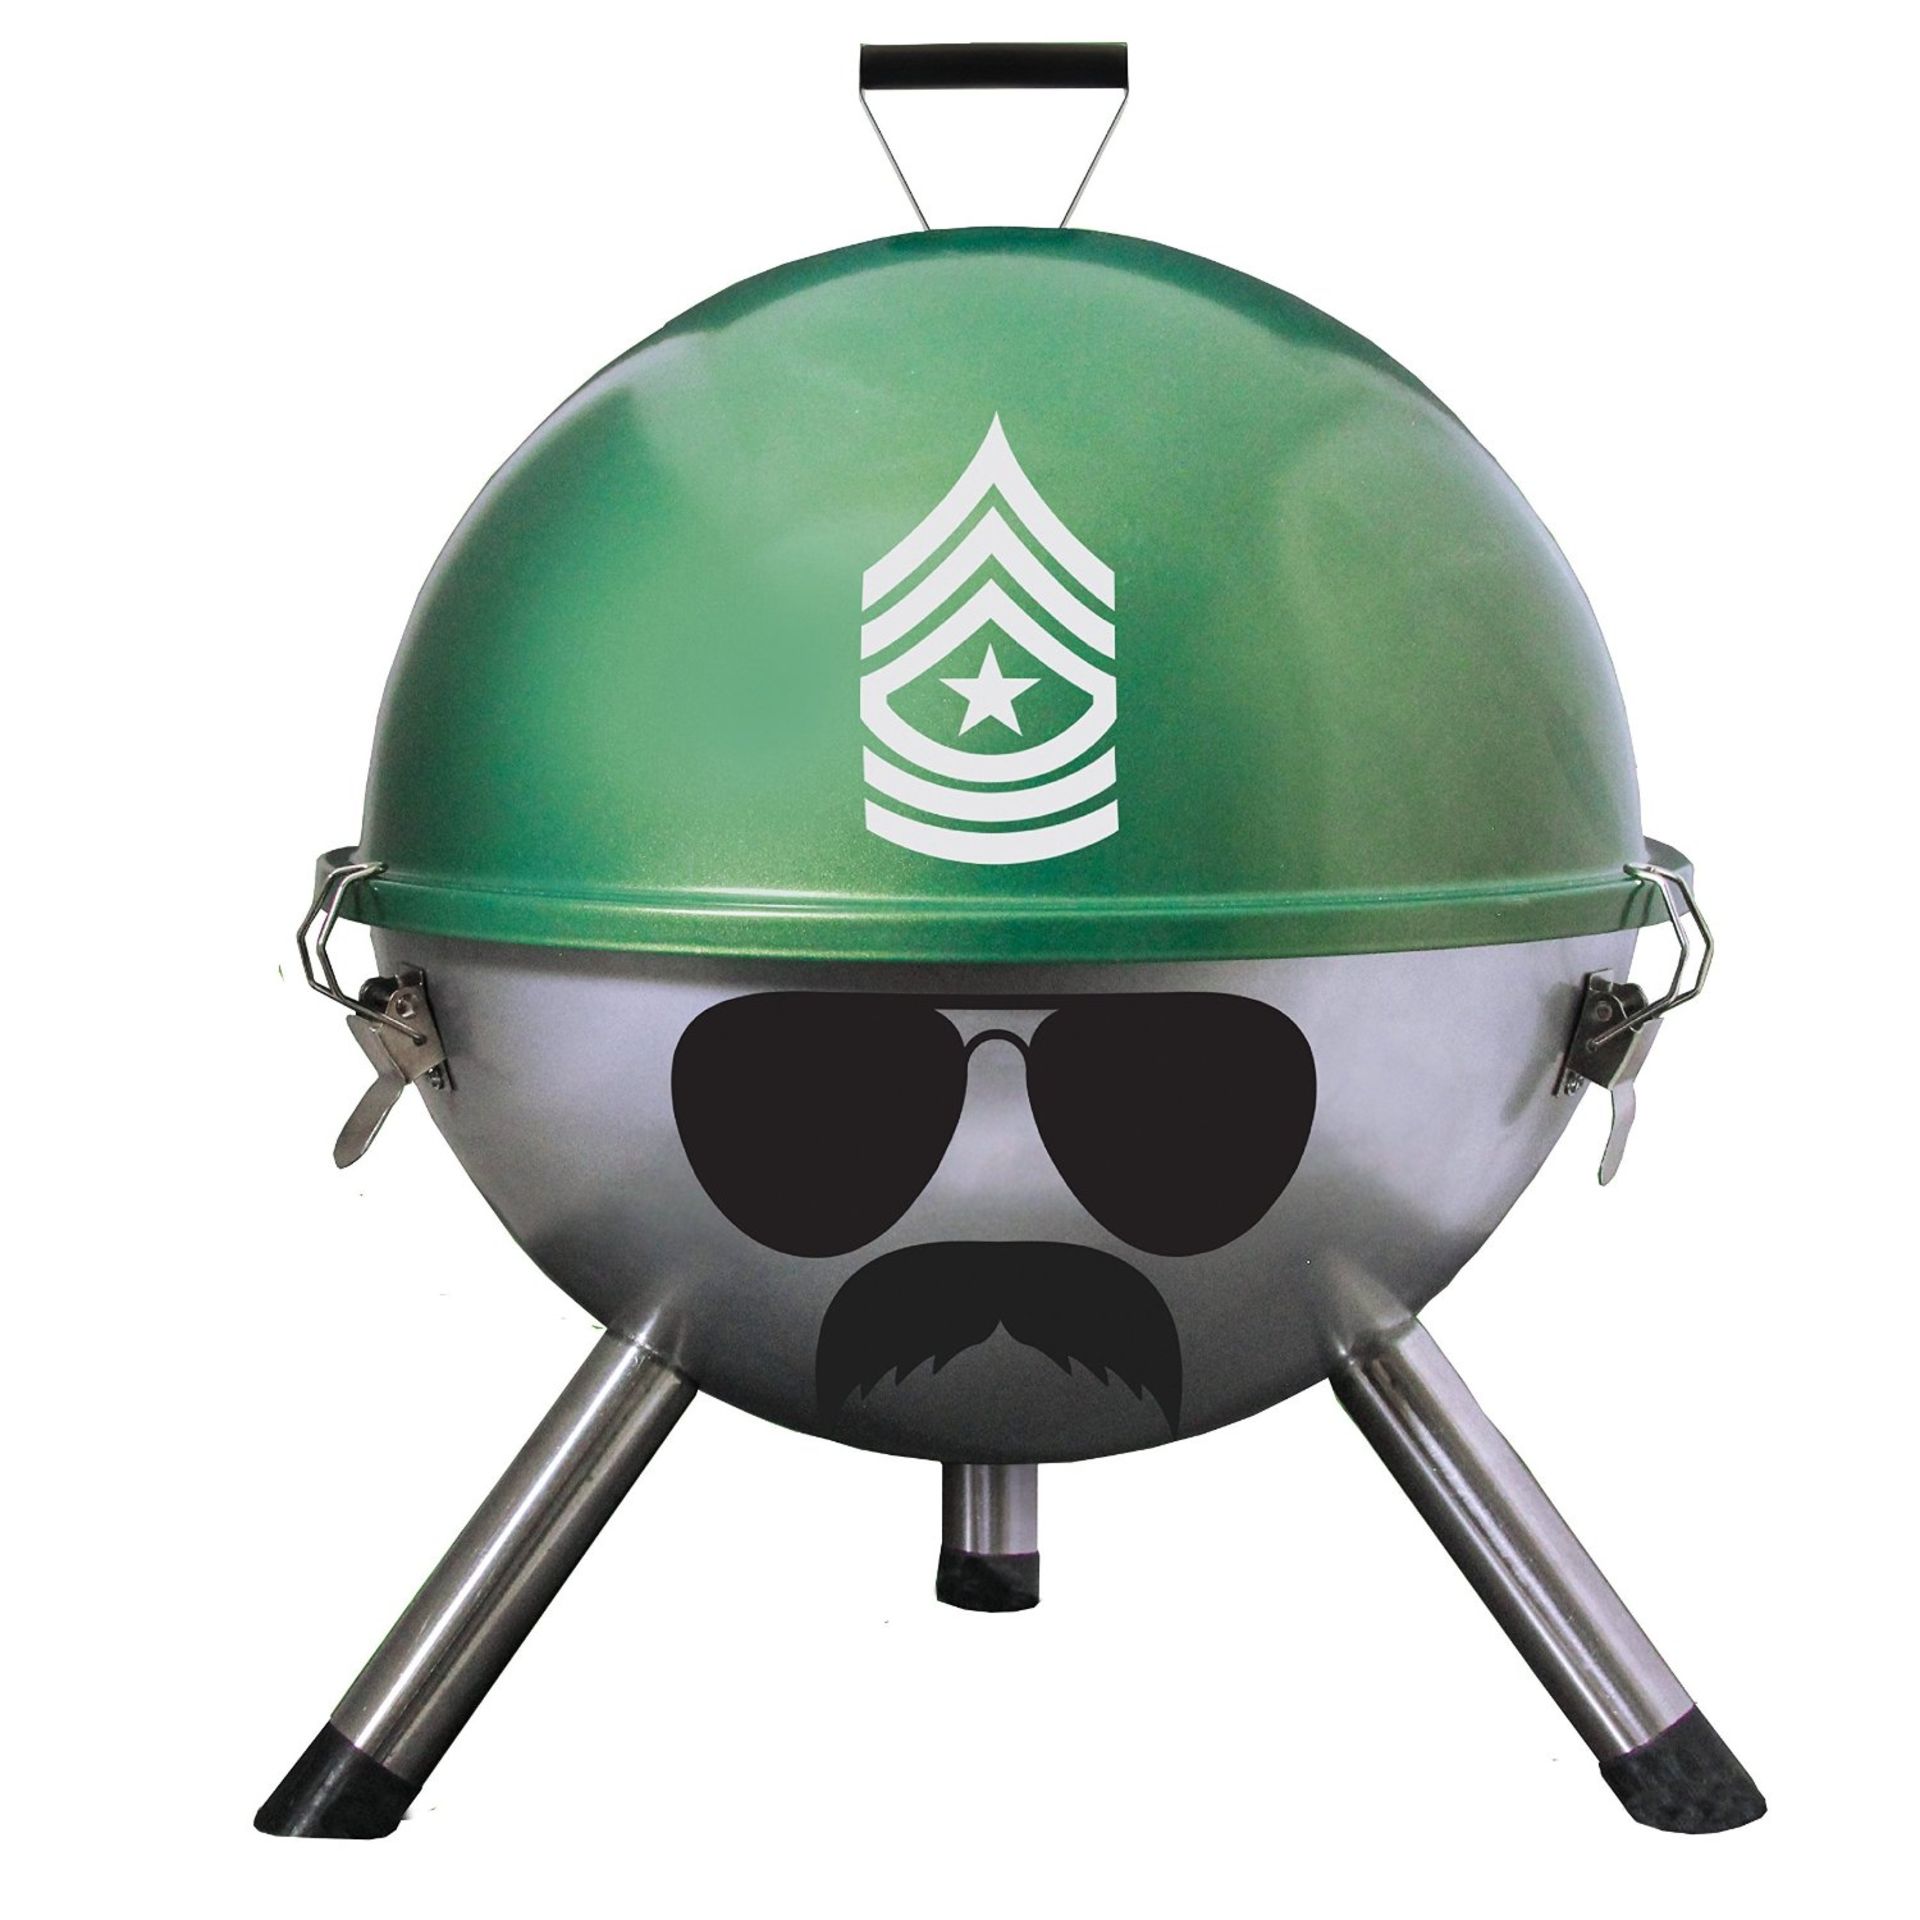 V *TRADE QTY* Brand New Grill Sergeant 12" Portable BBQ - RRP £29.99 - Amazon Selling Price £26.99 X